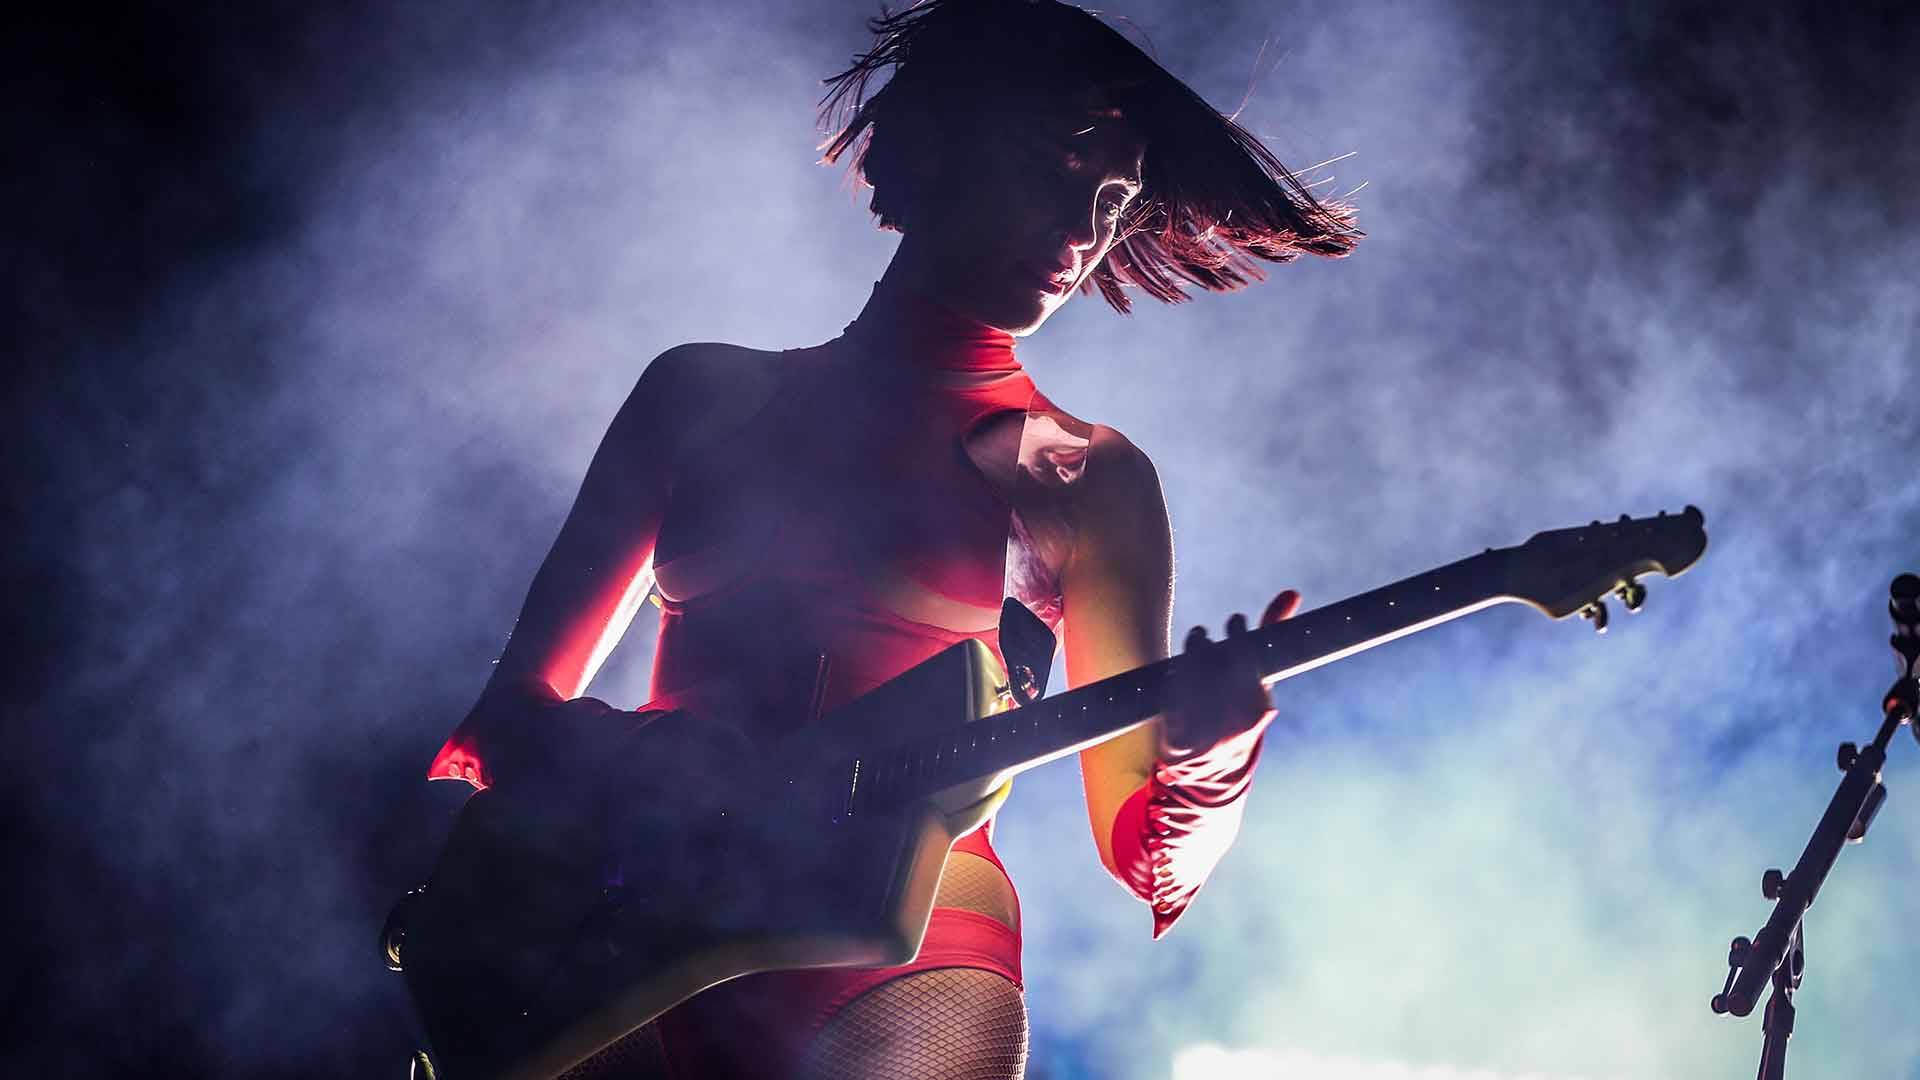 St. Vincent performs onstage at Coachella on April 20, 2018. Rich Fury/Getty Images for Coachella